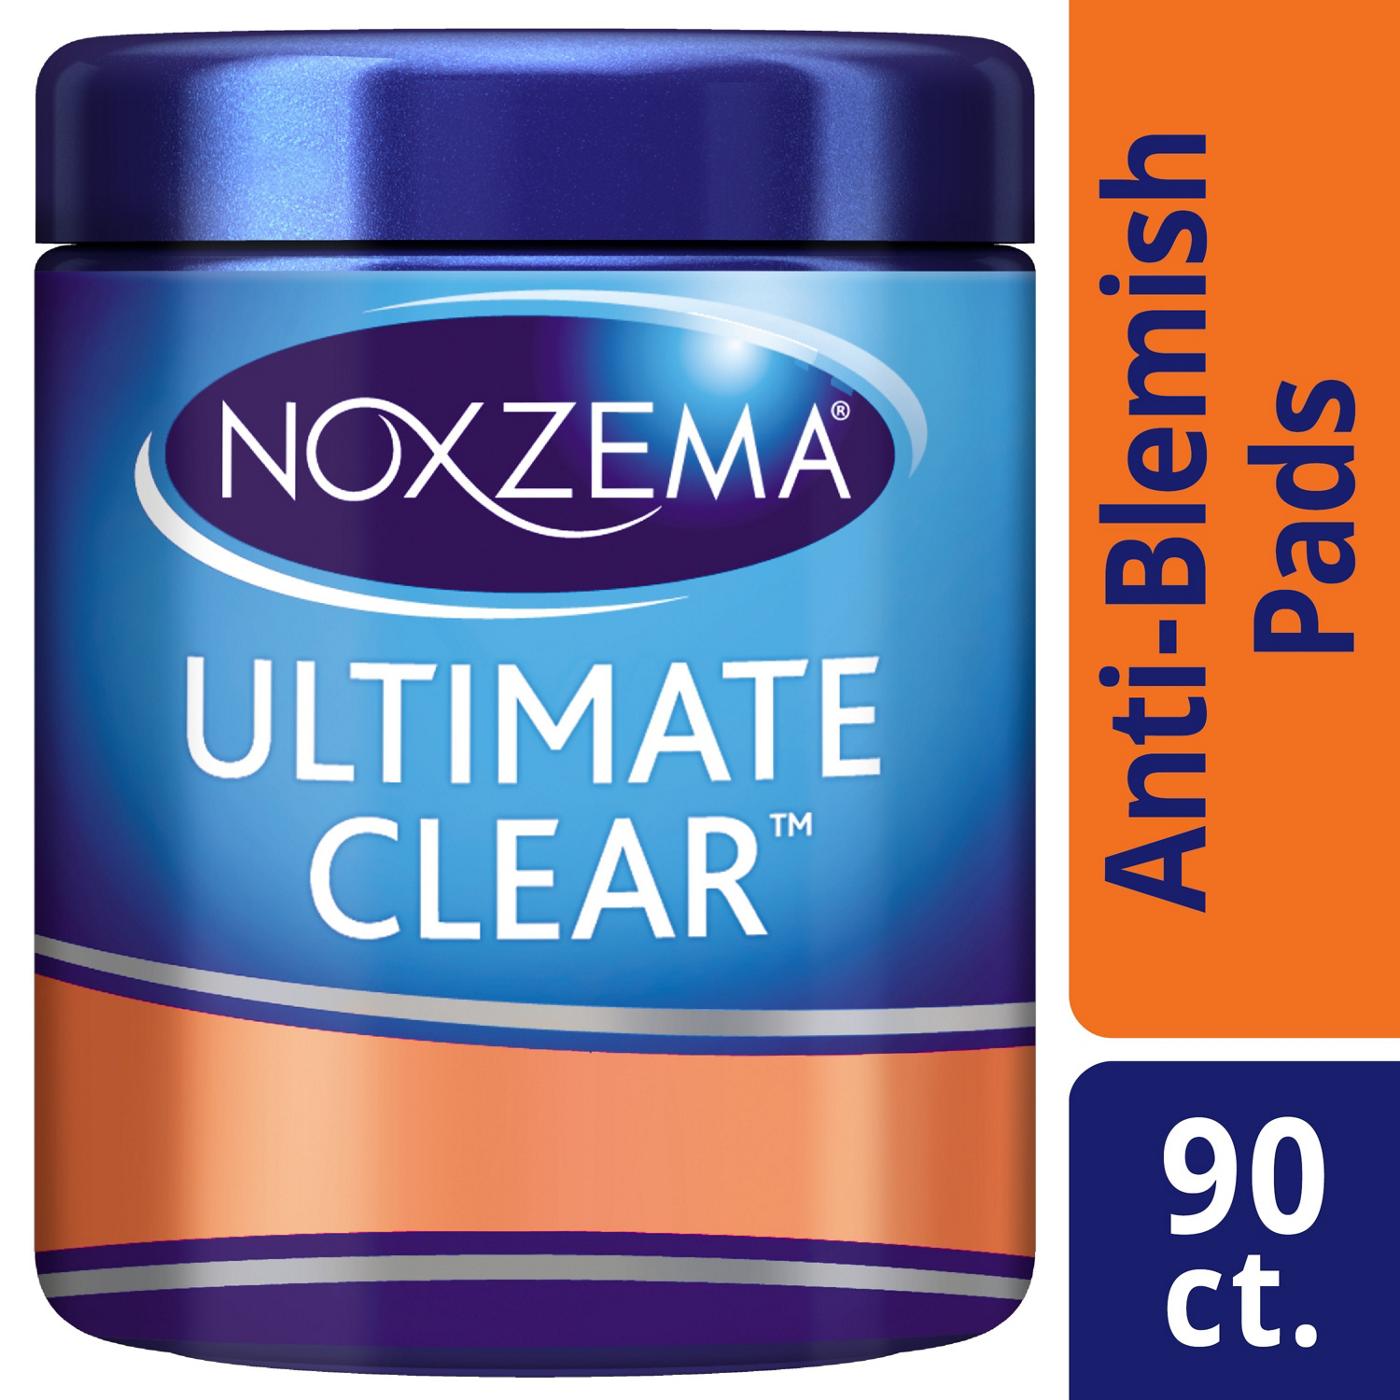 Noxzema Ultimate Clear Anti Blemish Pads; image 2 of 3